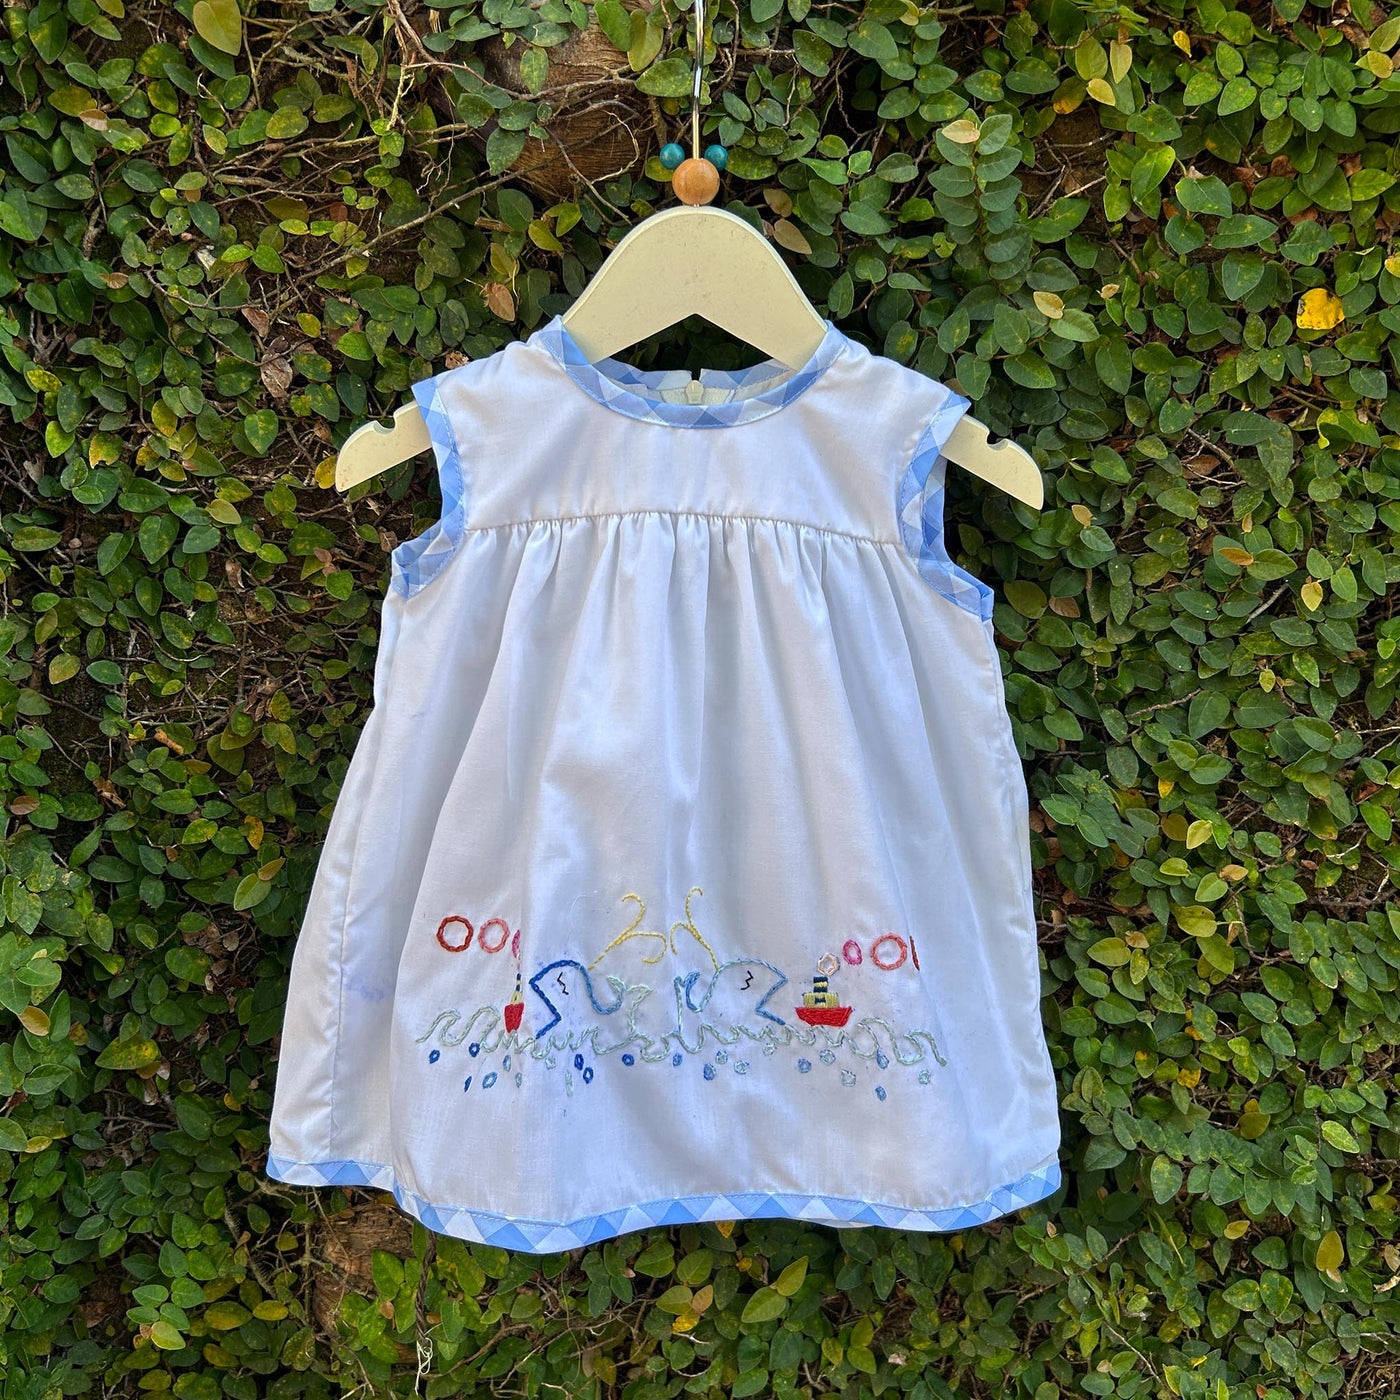 white embroidered baby frock